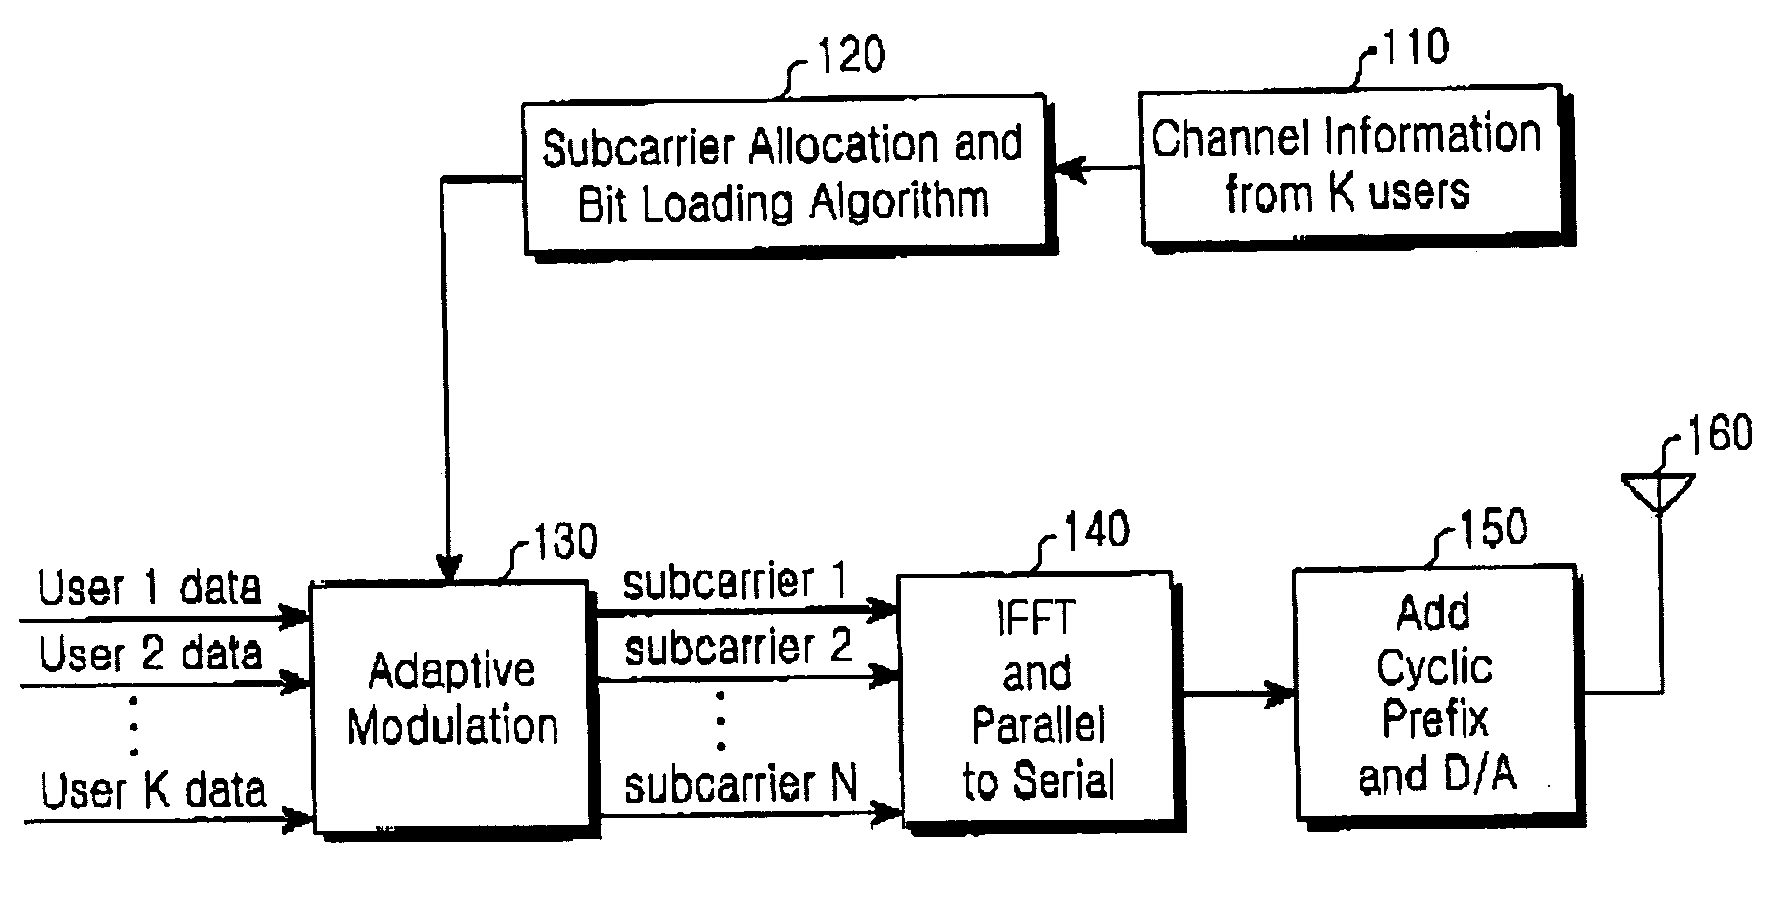 Method for allocating subchannels in an OFDMA mobile communication system